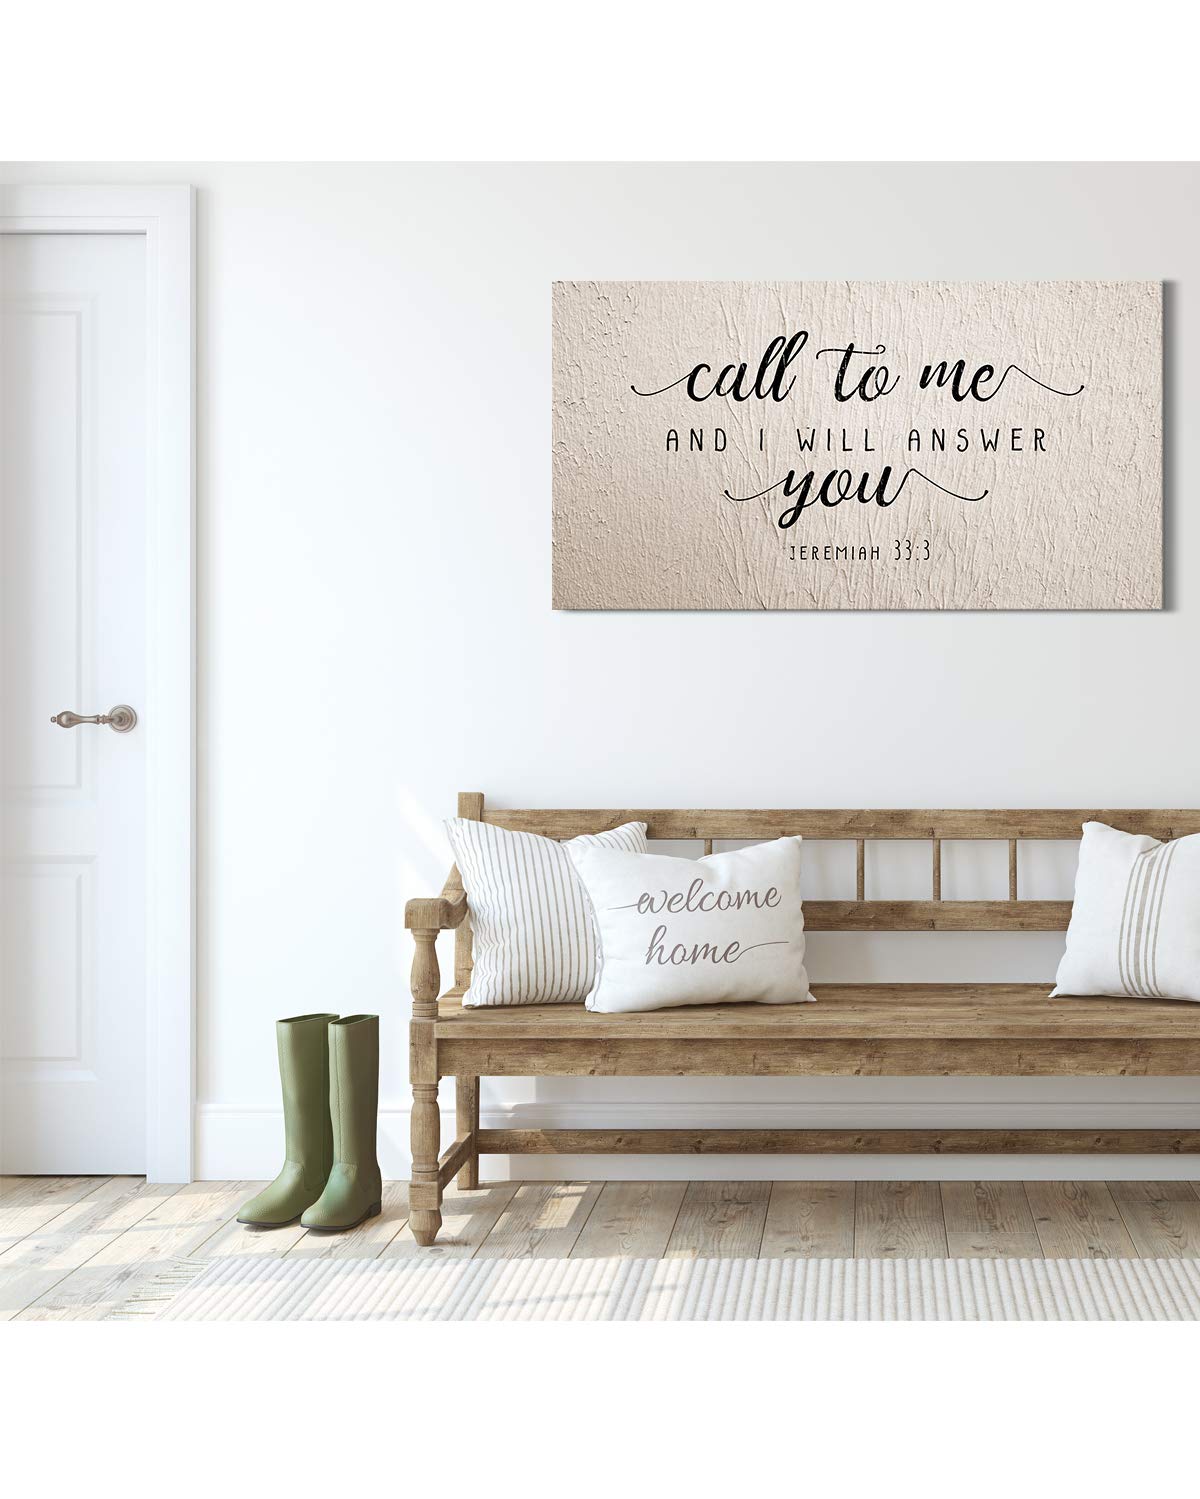 Call To Me and I Will Answer You Jeremiah 33:3 - Religious Wall Decor Art Canvas on Cream Background - Ready to Hang - Great for above a couch, table, bed or more